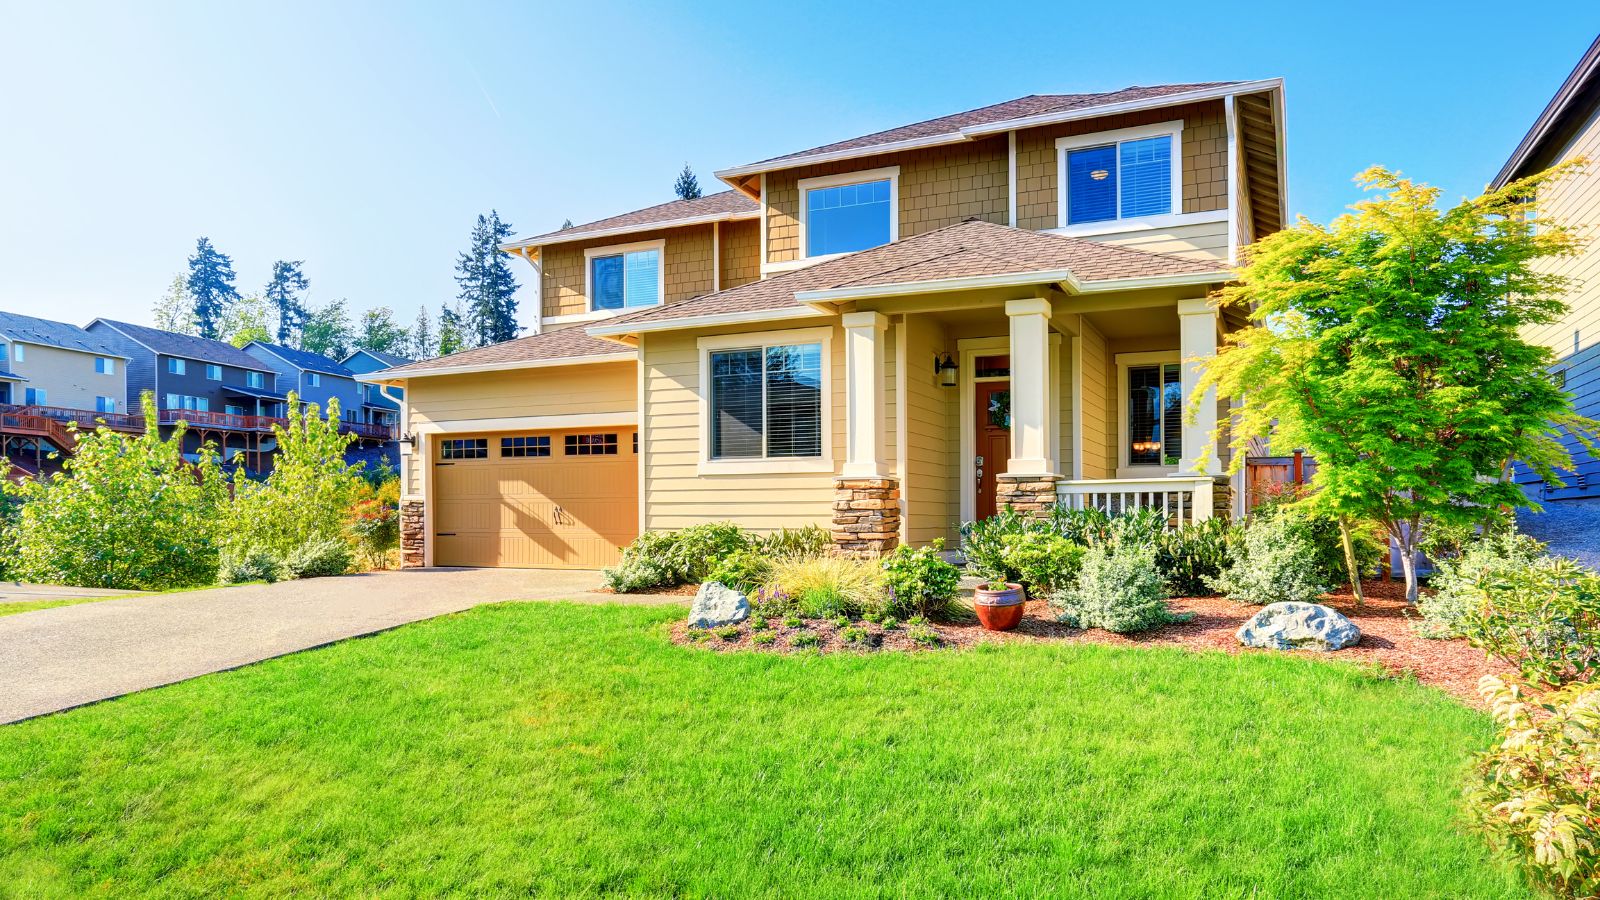 Elevating Your Home's Curb Appeal